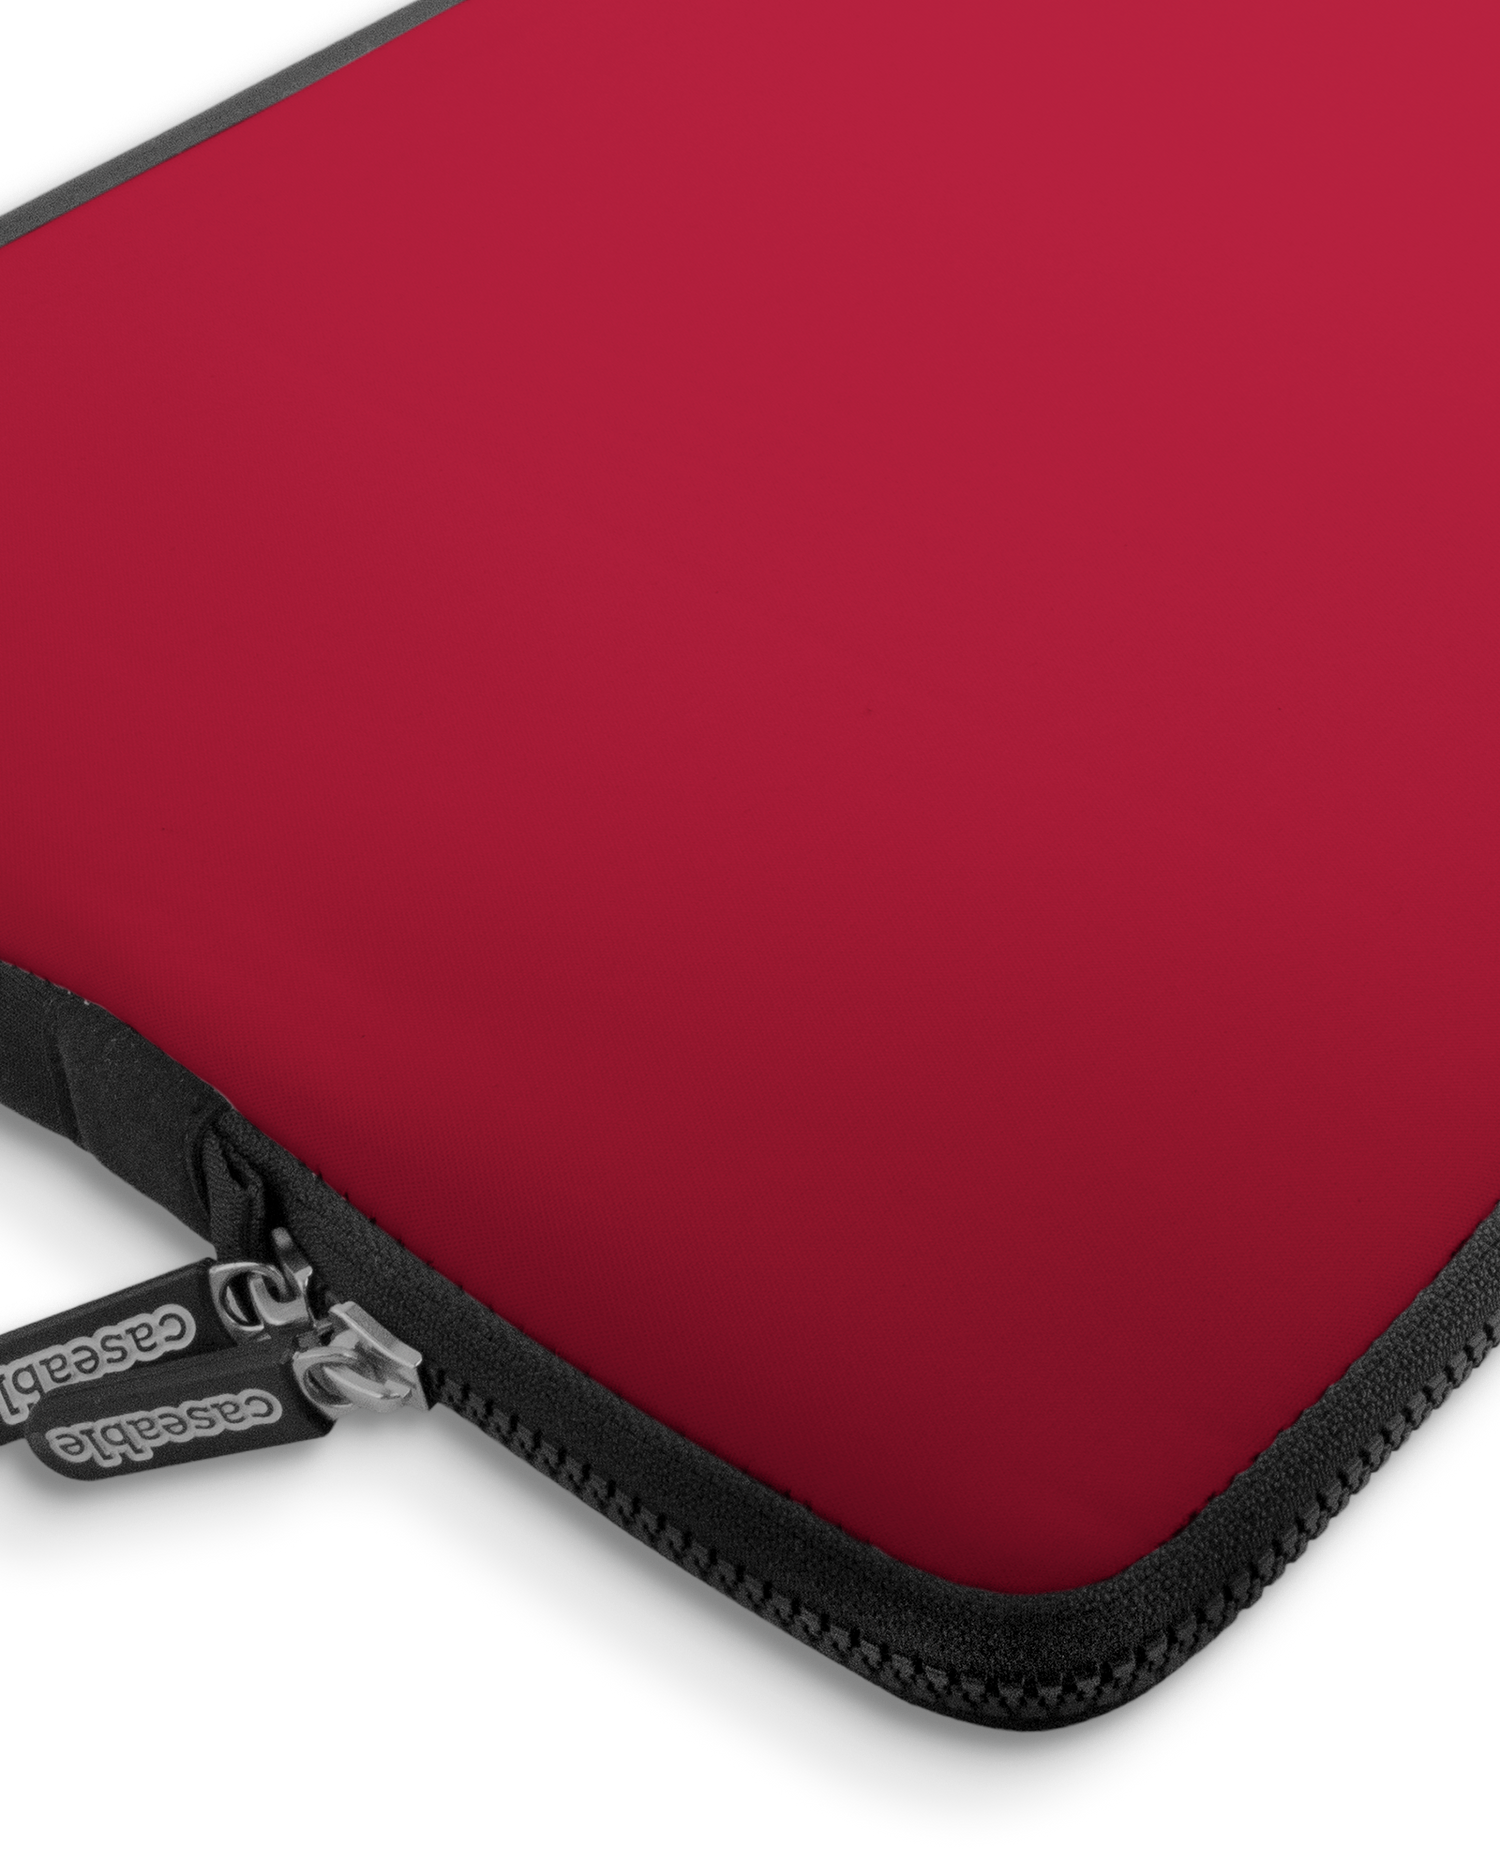 RED Premium Laptop Bag 17 inch with device inside